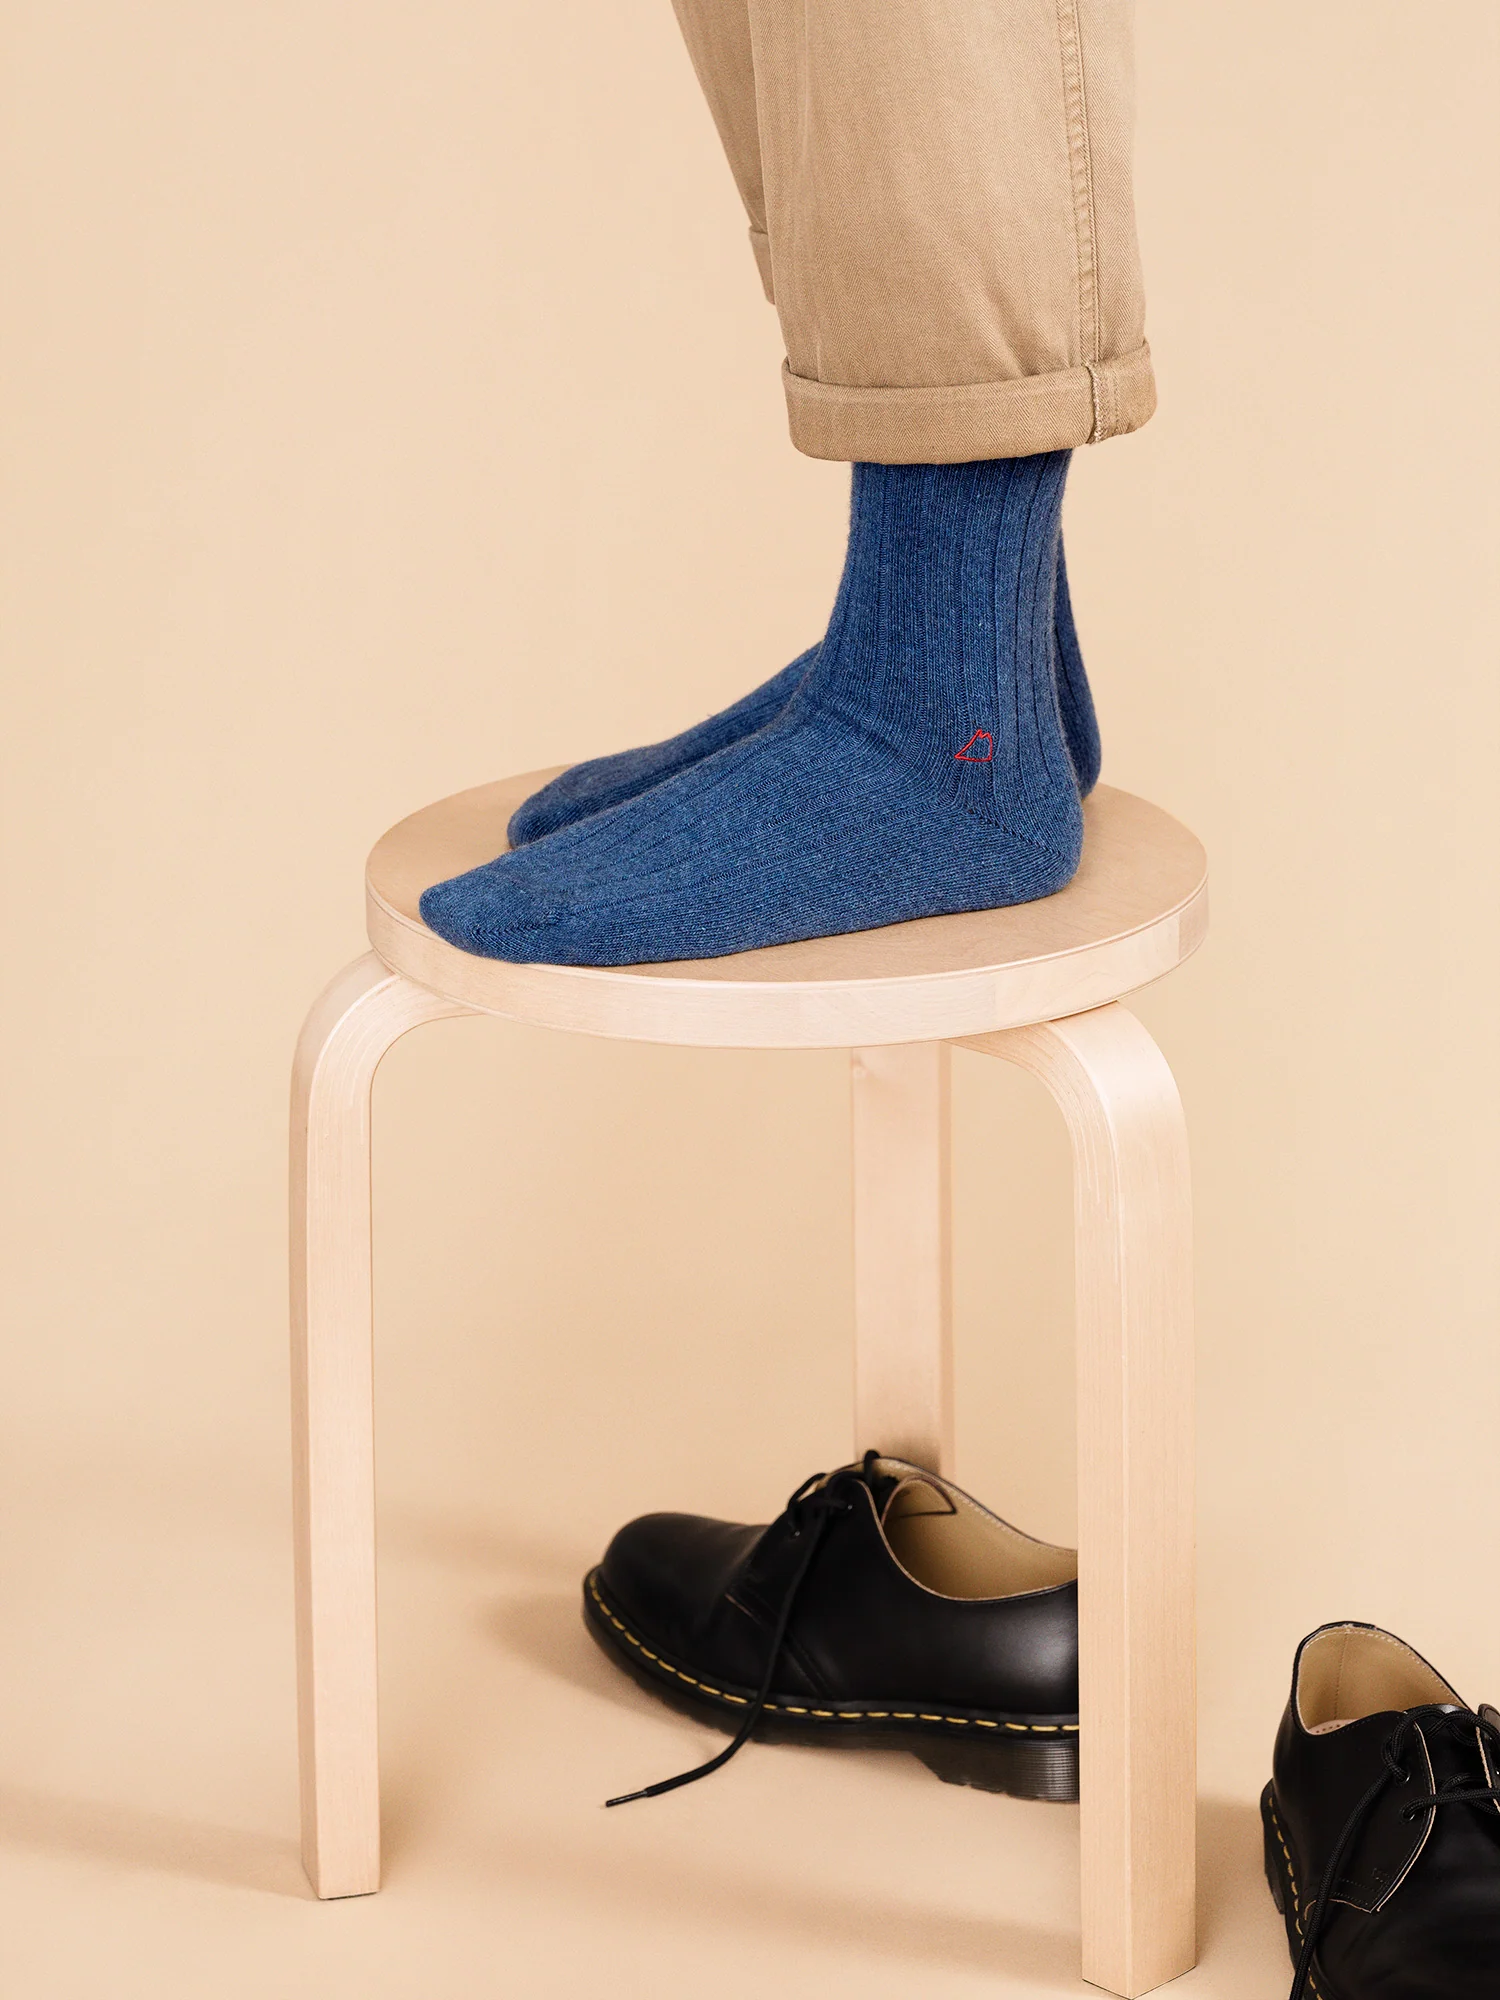 person wearing blue socks stands on a small stool. 